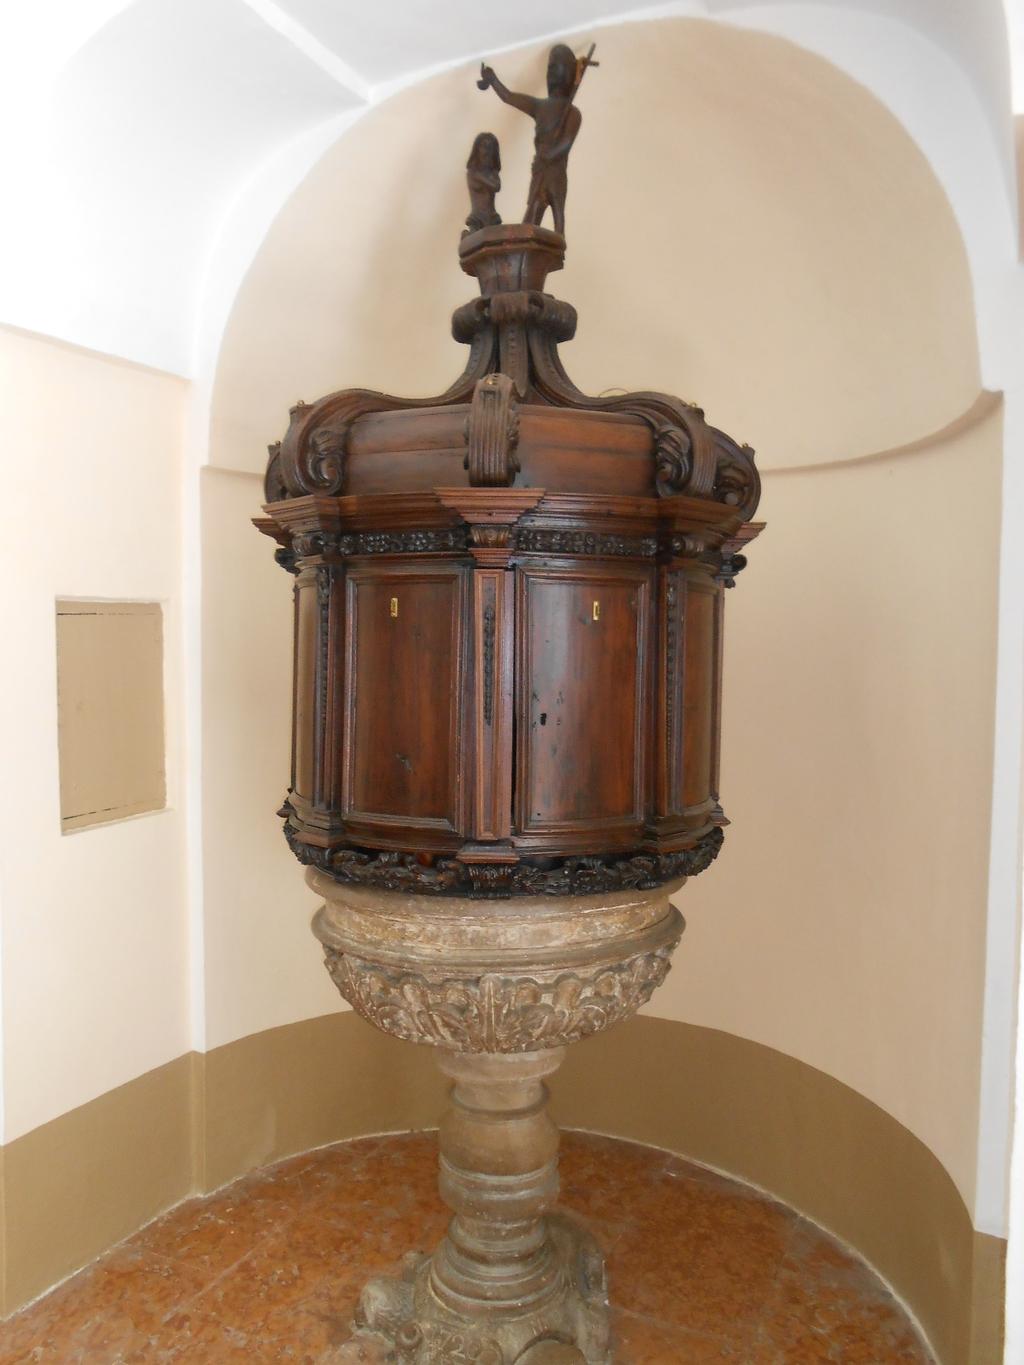 Baptismal Font in the Church of Santa Maria delle Grazie Also the marriage between Lorenzo Greco and Antonia Cortese could not be found in San Giovanni in Fiore; we believe that Antonia was from a